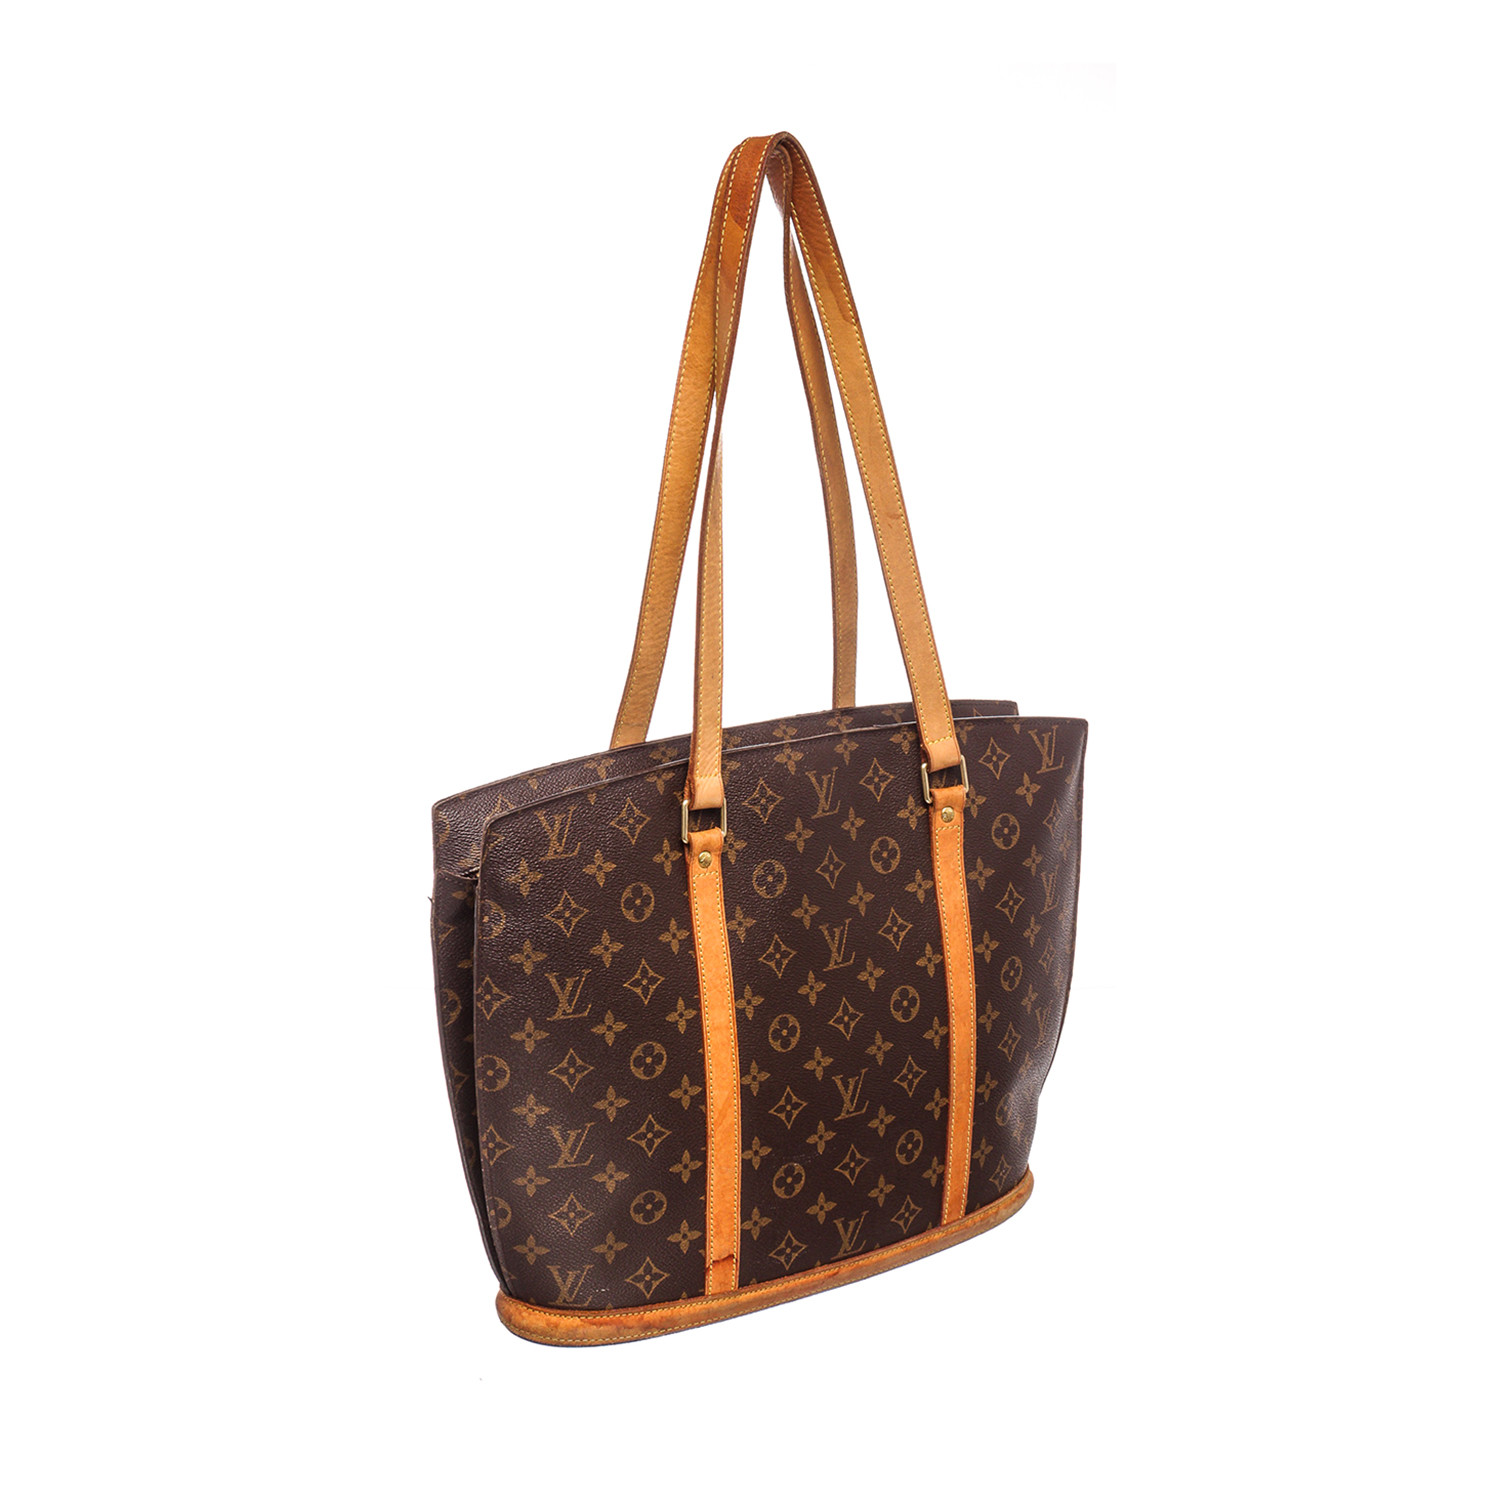 Louis Vuitton // Monogram Canvas Leather Babylone Tote Bag // MB0092 // Pre-Owned - Pre-Owned ...